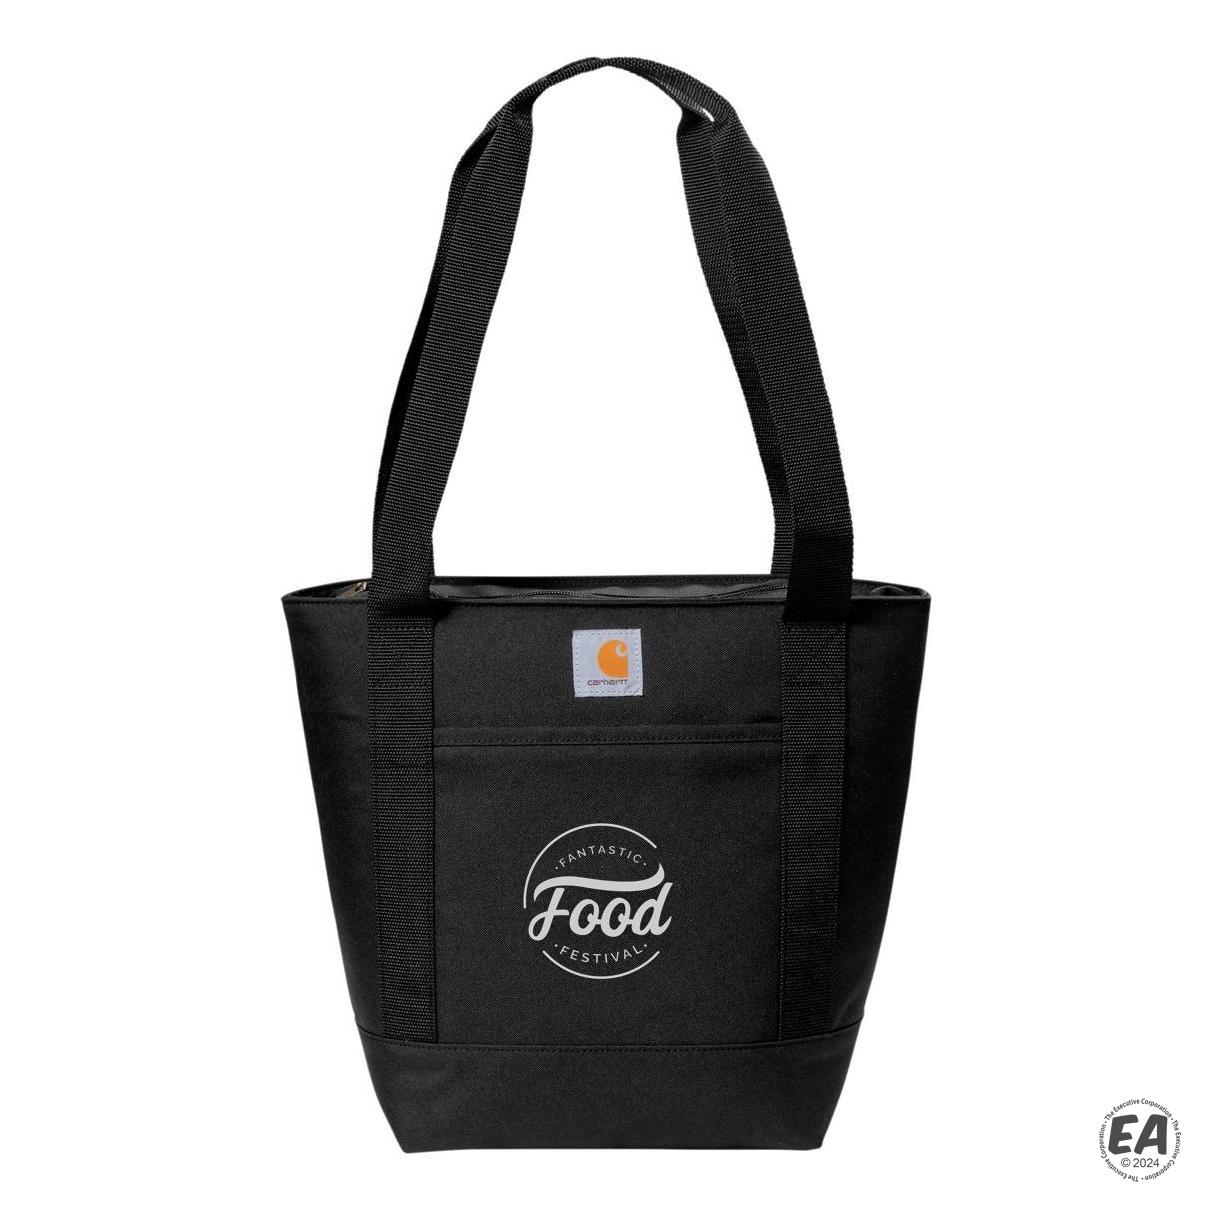 Carhartt Tote 18-Can Cooler. CT89101701